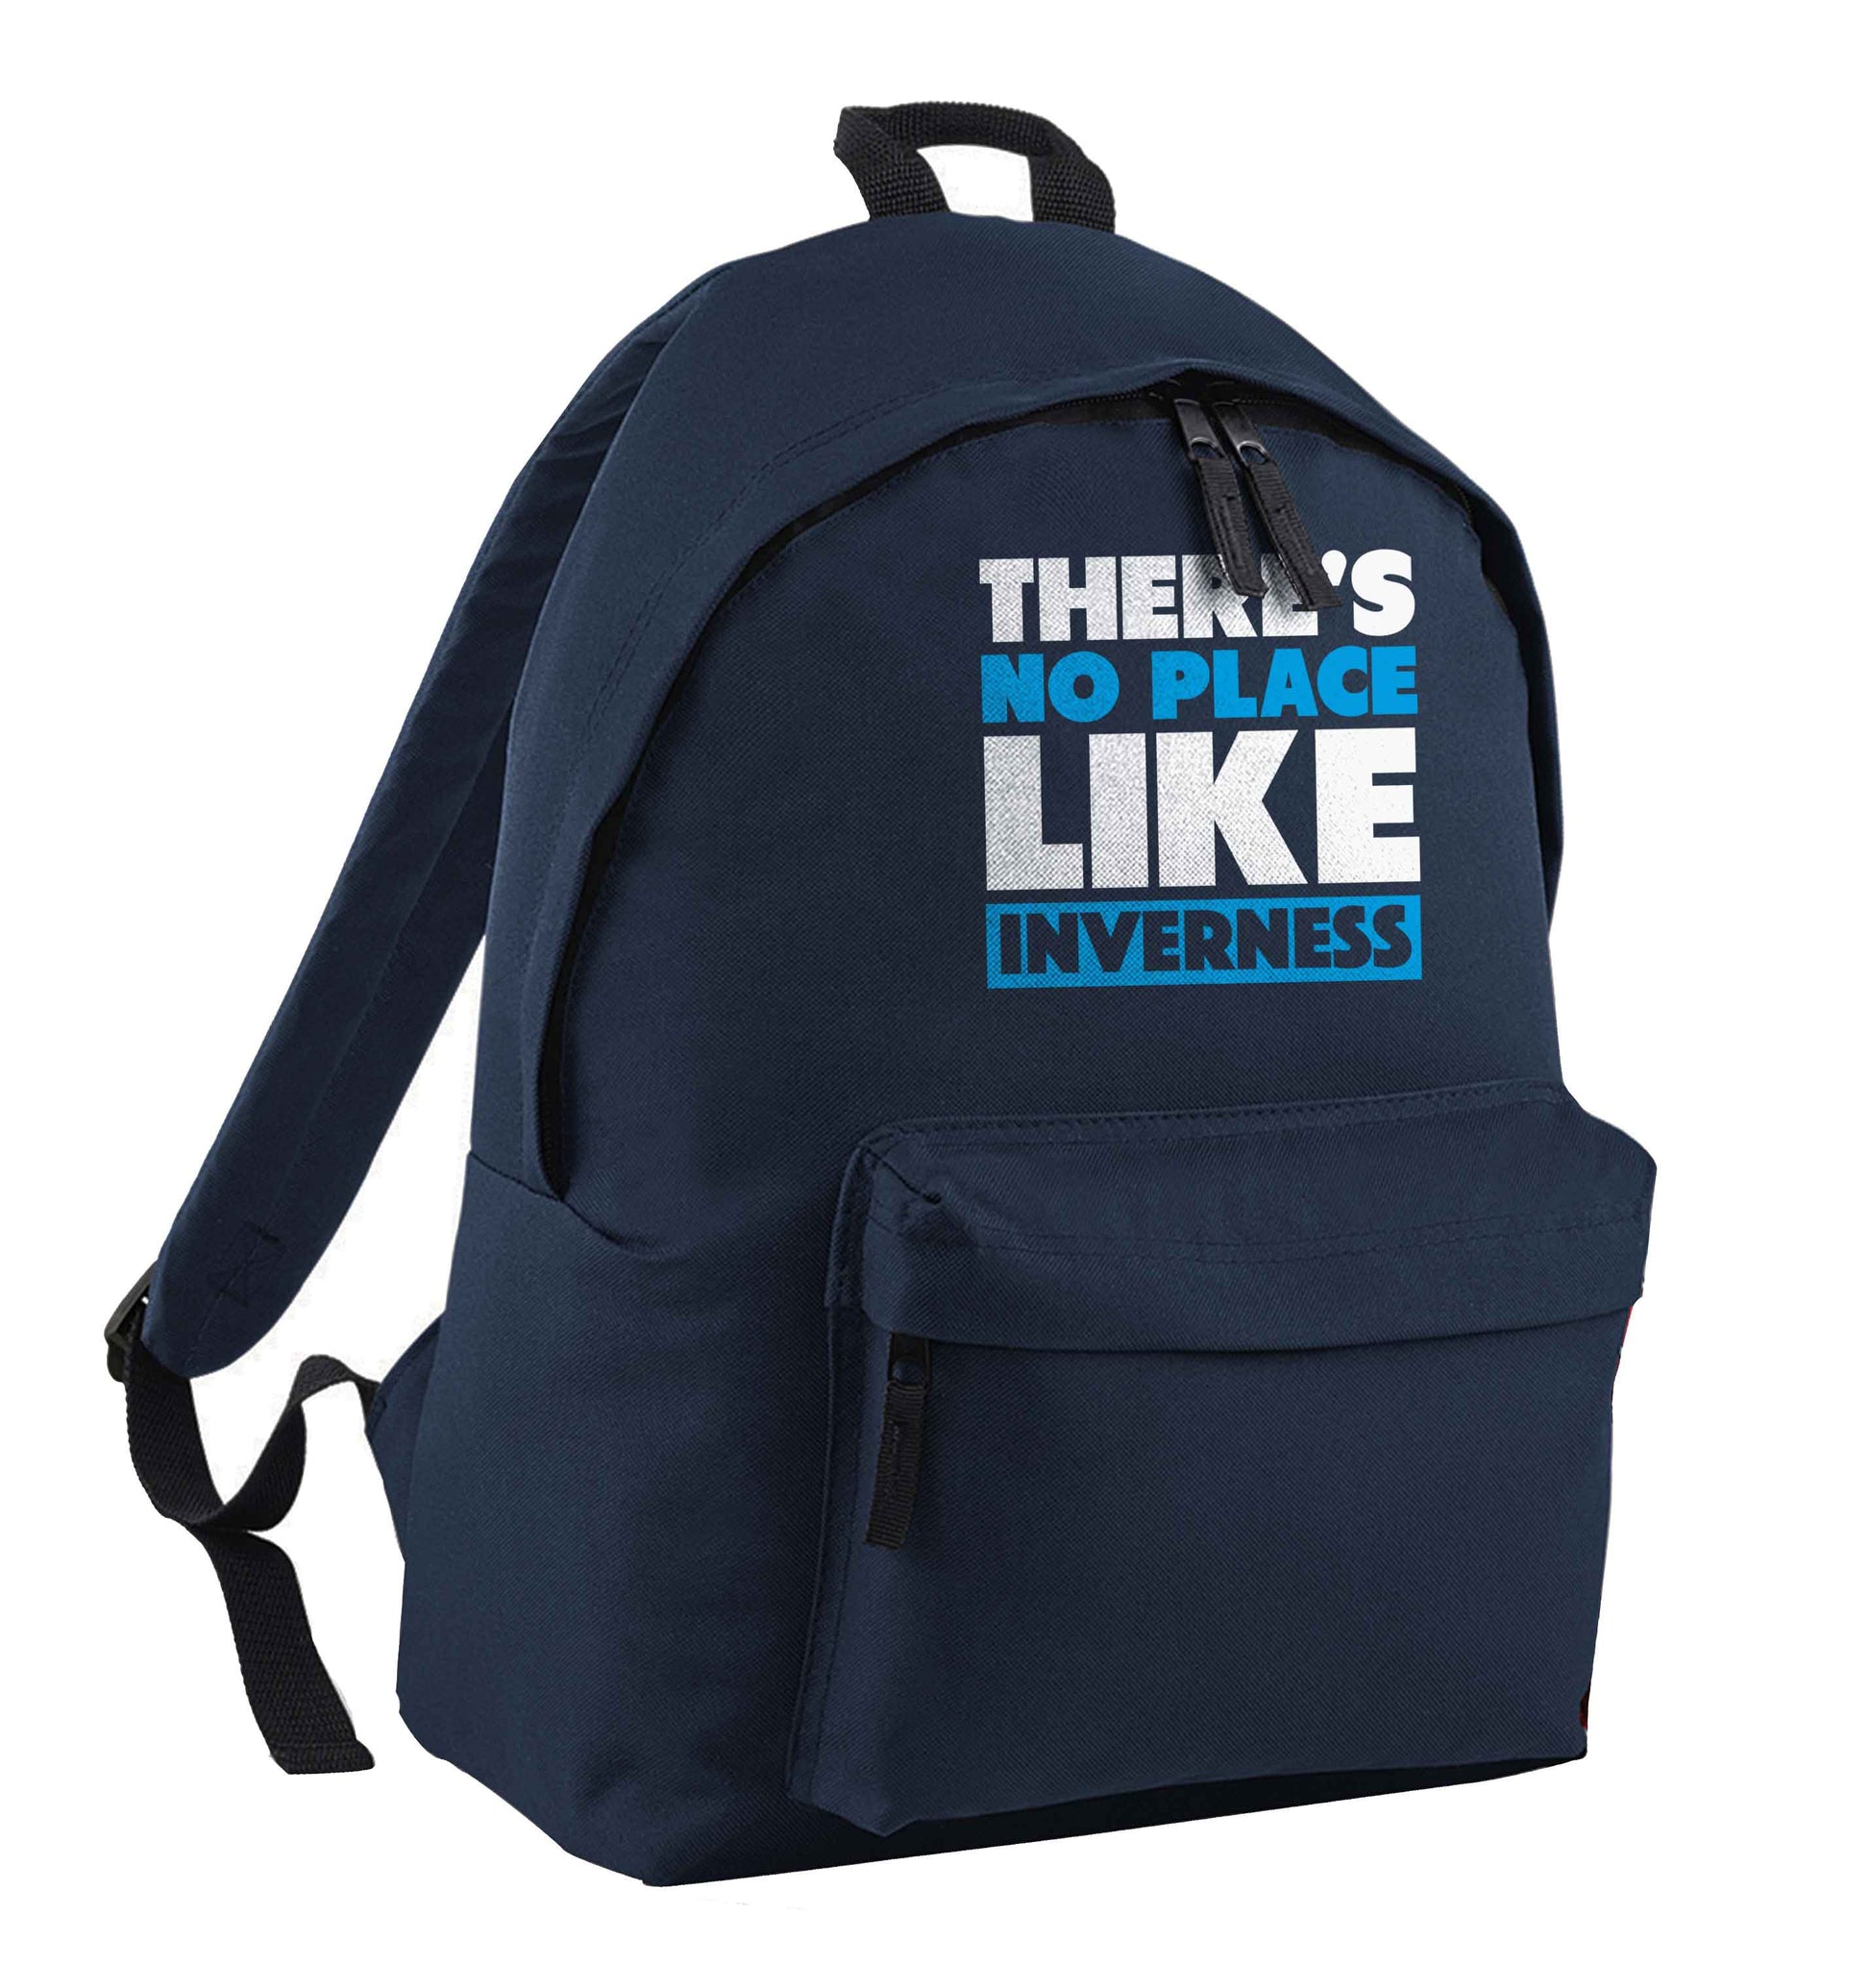 There's no place like Inverness navy children's backpack